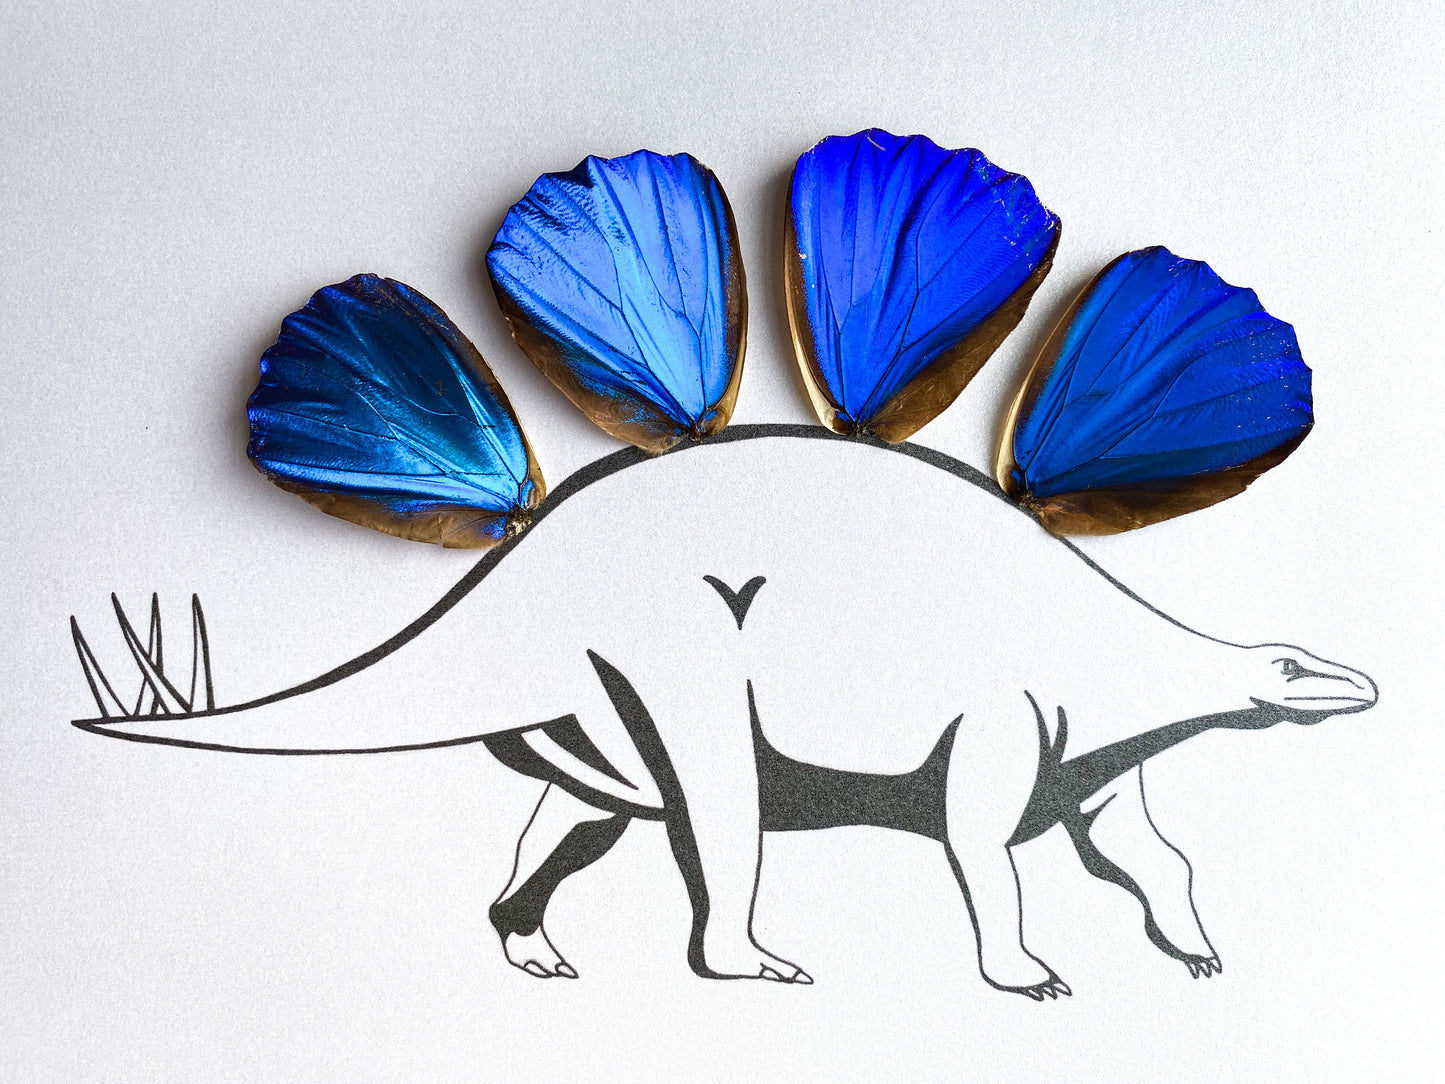 Dinosaur Stegosaurus Real Butterfly Wing Art Ethically Sourced Made in MN USA - Holly Ulm - Isms Butterfly Conservation Art